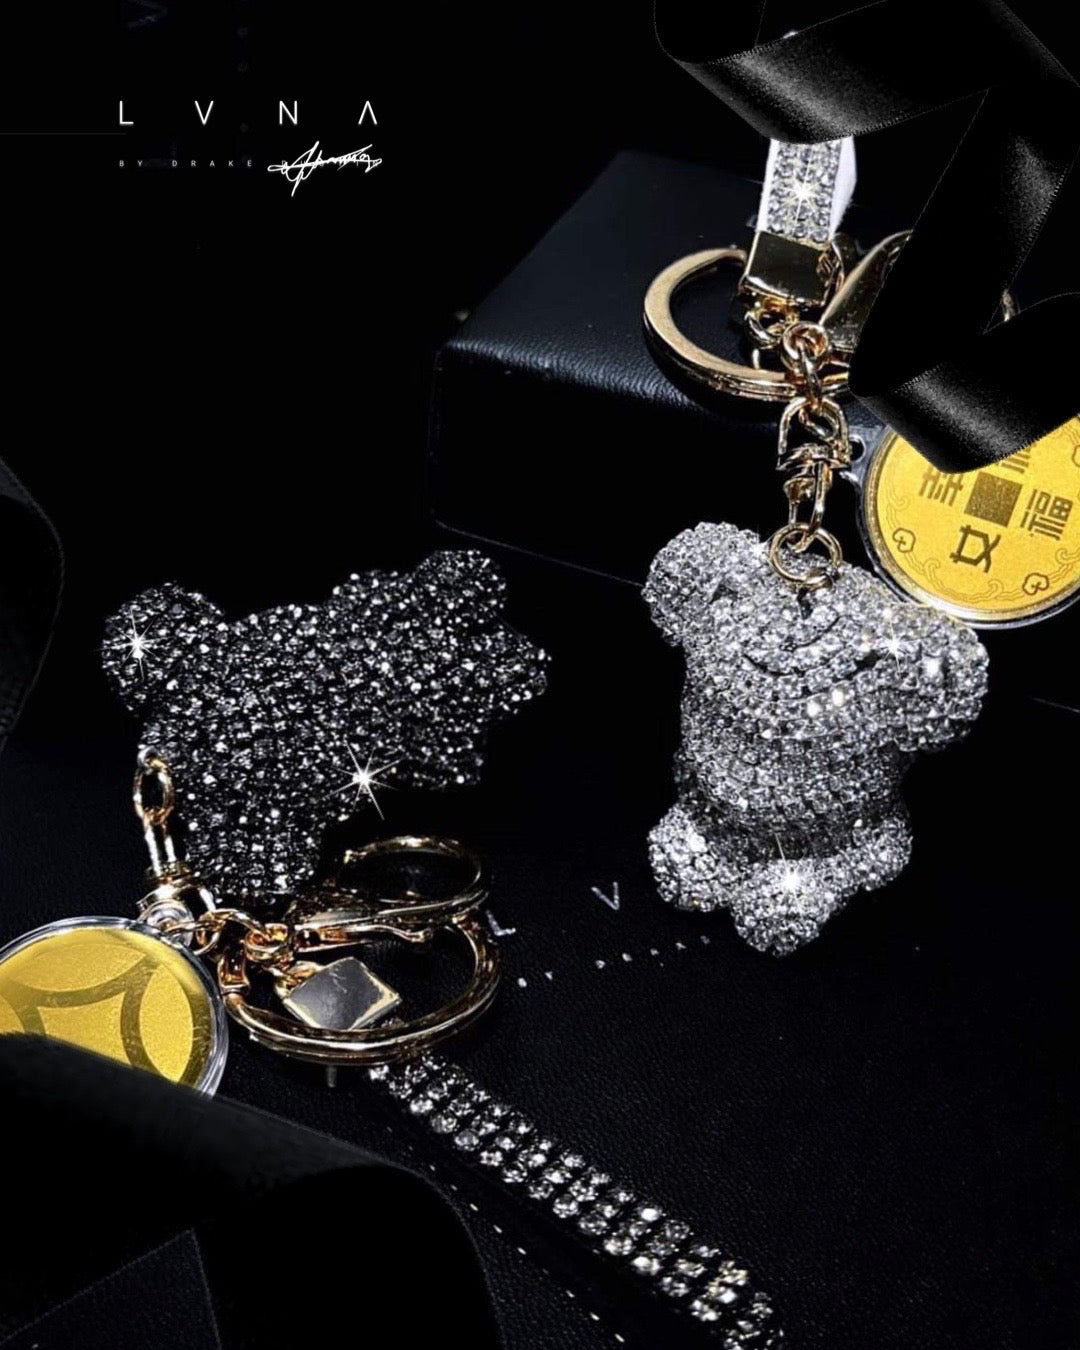 Bear Keychain with 24k Gold Chip